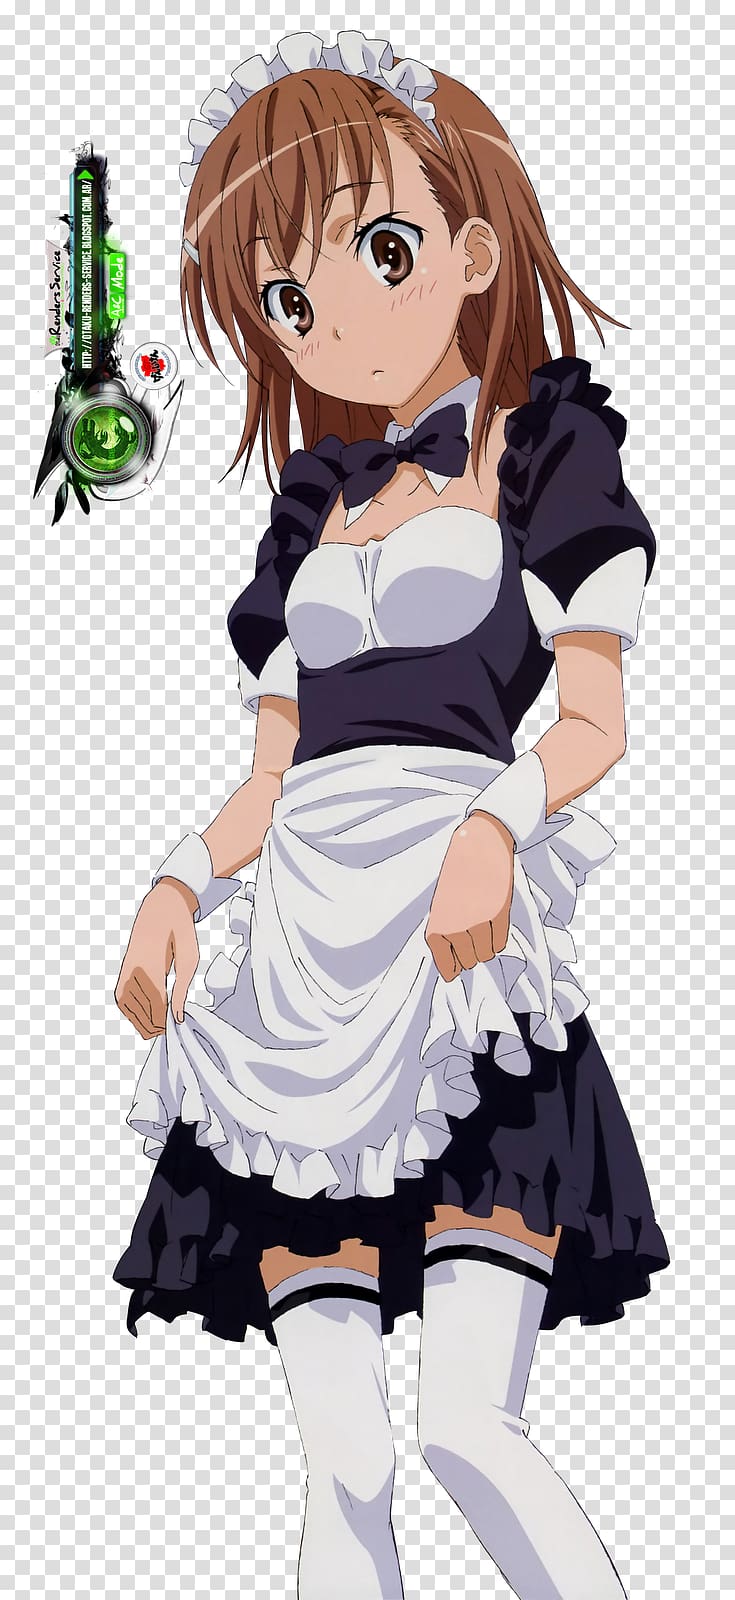 Lady's maid Mikoto Misaka Soubrette Domestic worker, Anime transparent background PNG clipart